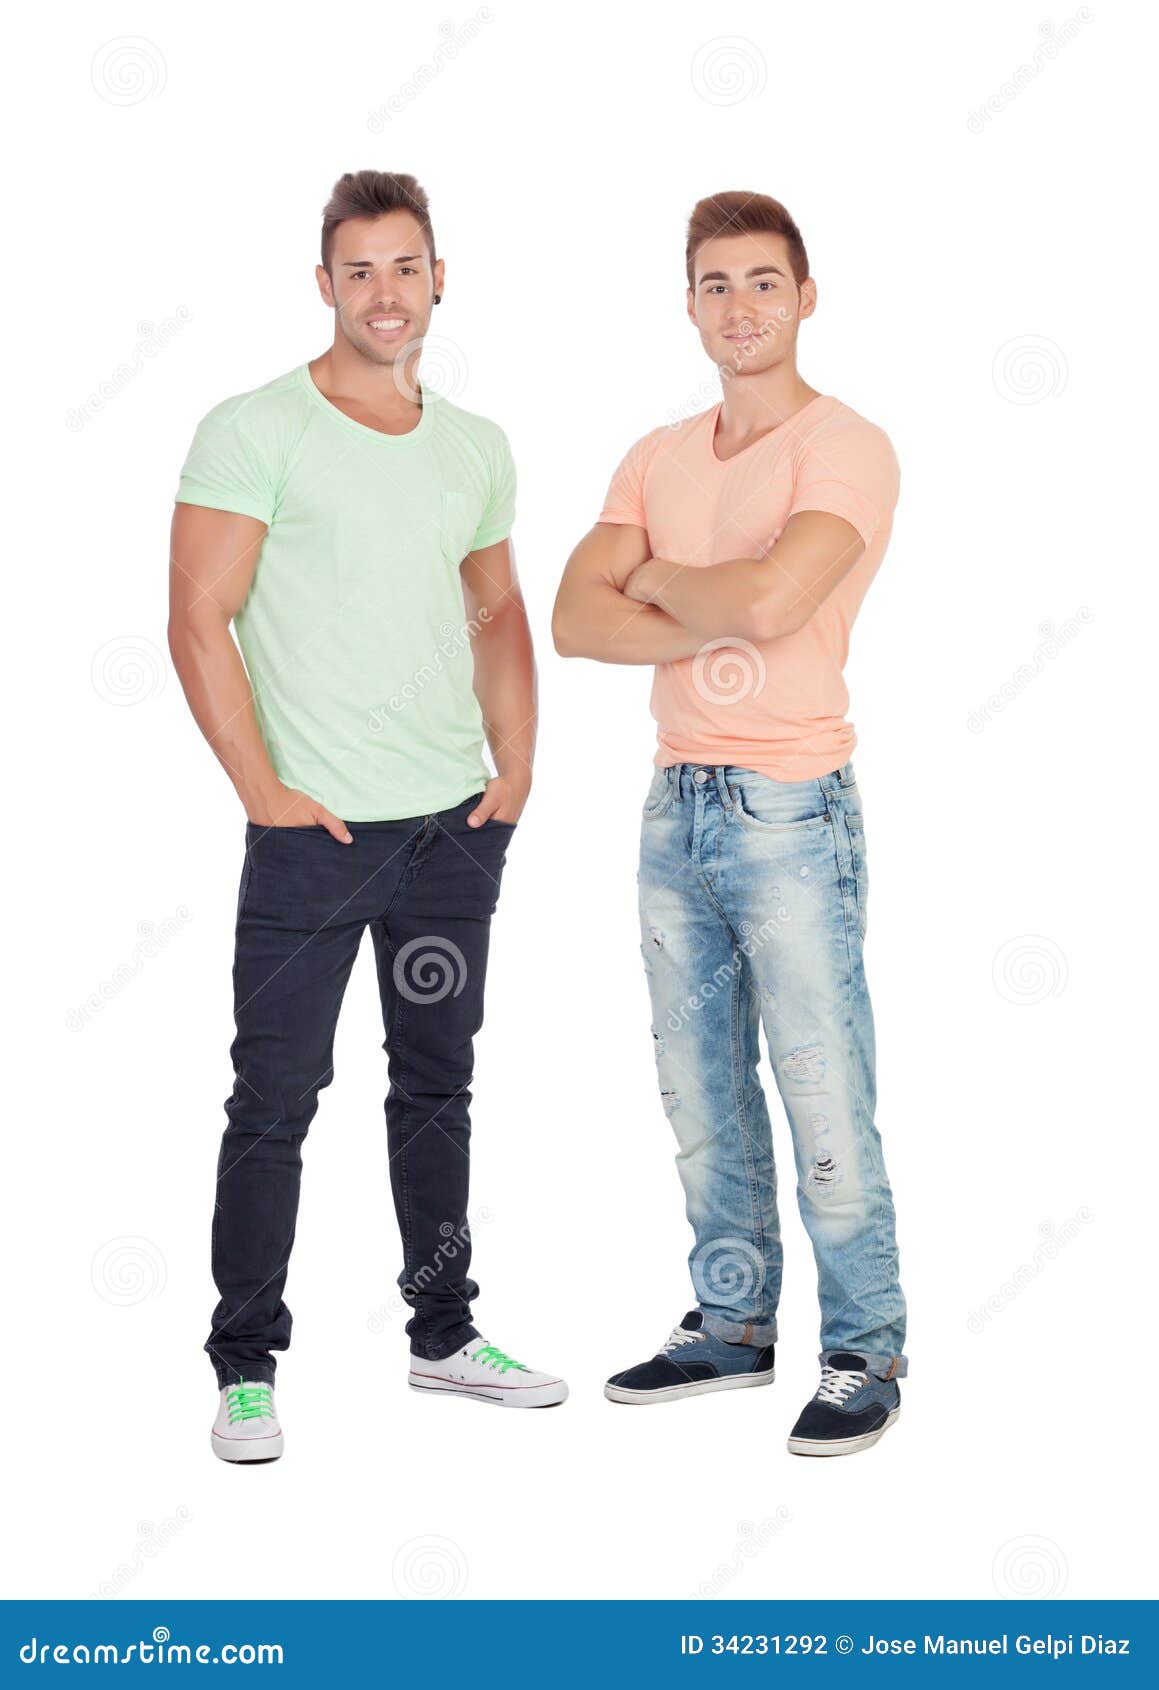 Couple of handsome man stock photo. Image of modern, adult - 34231292